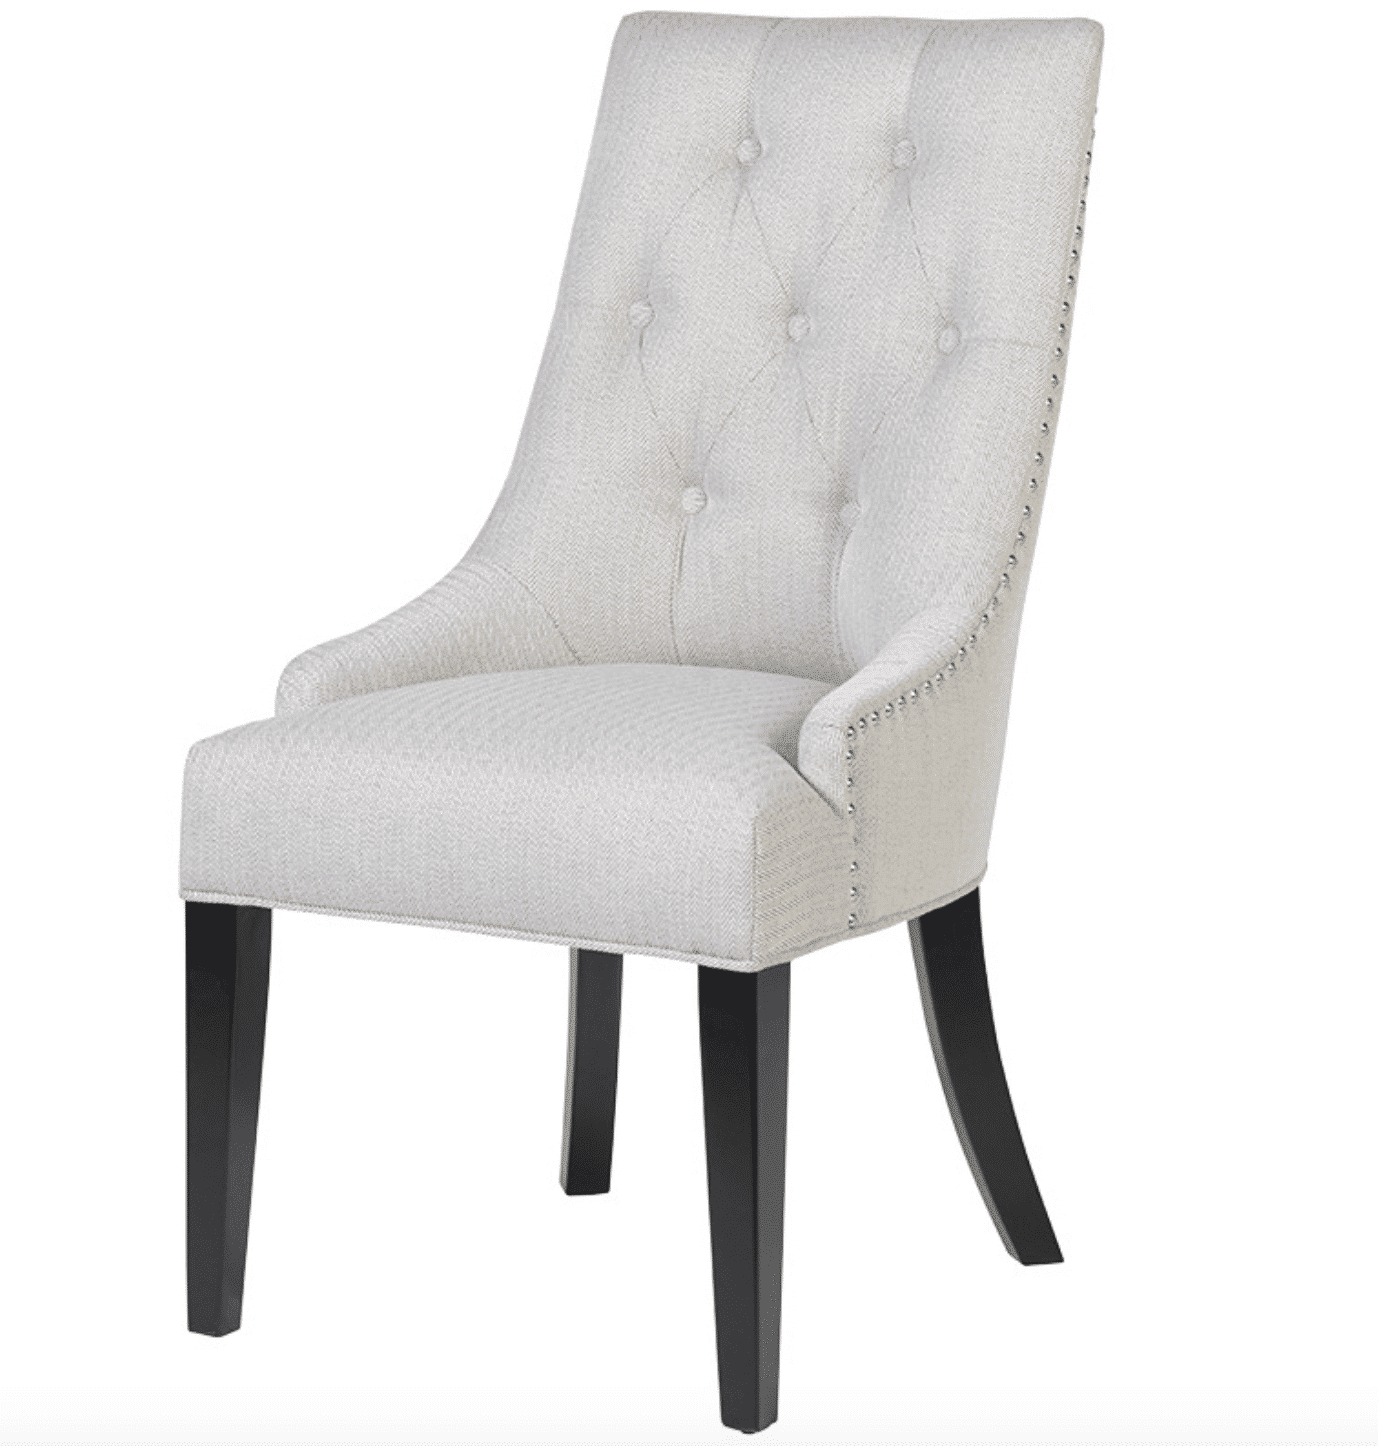 Square Knocker Chair in a Taupe Chevron Linen